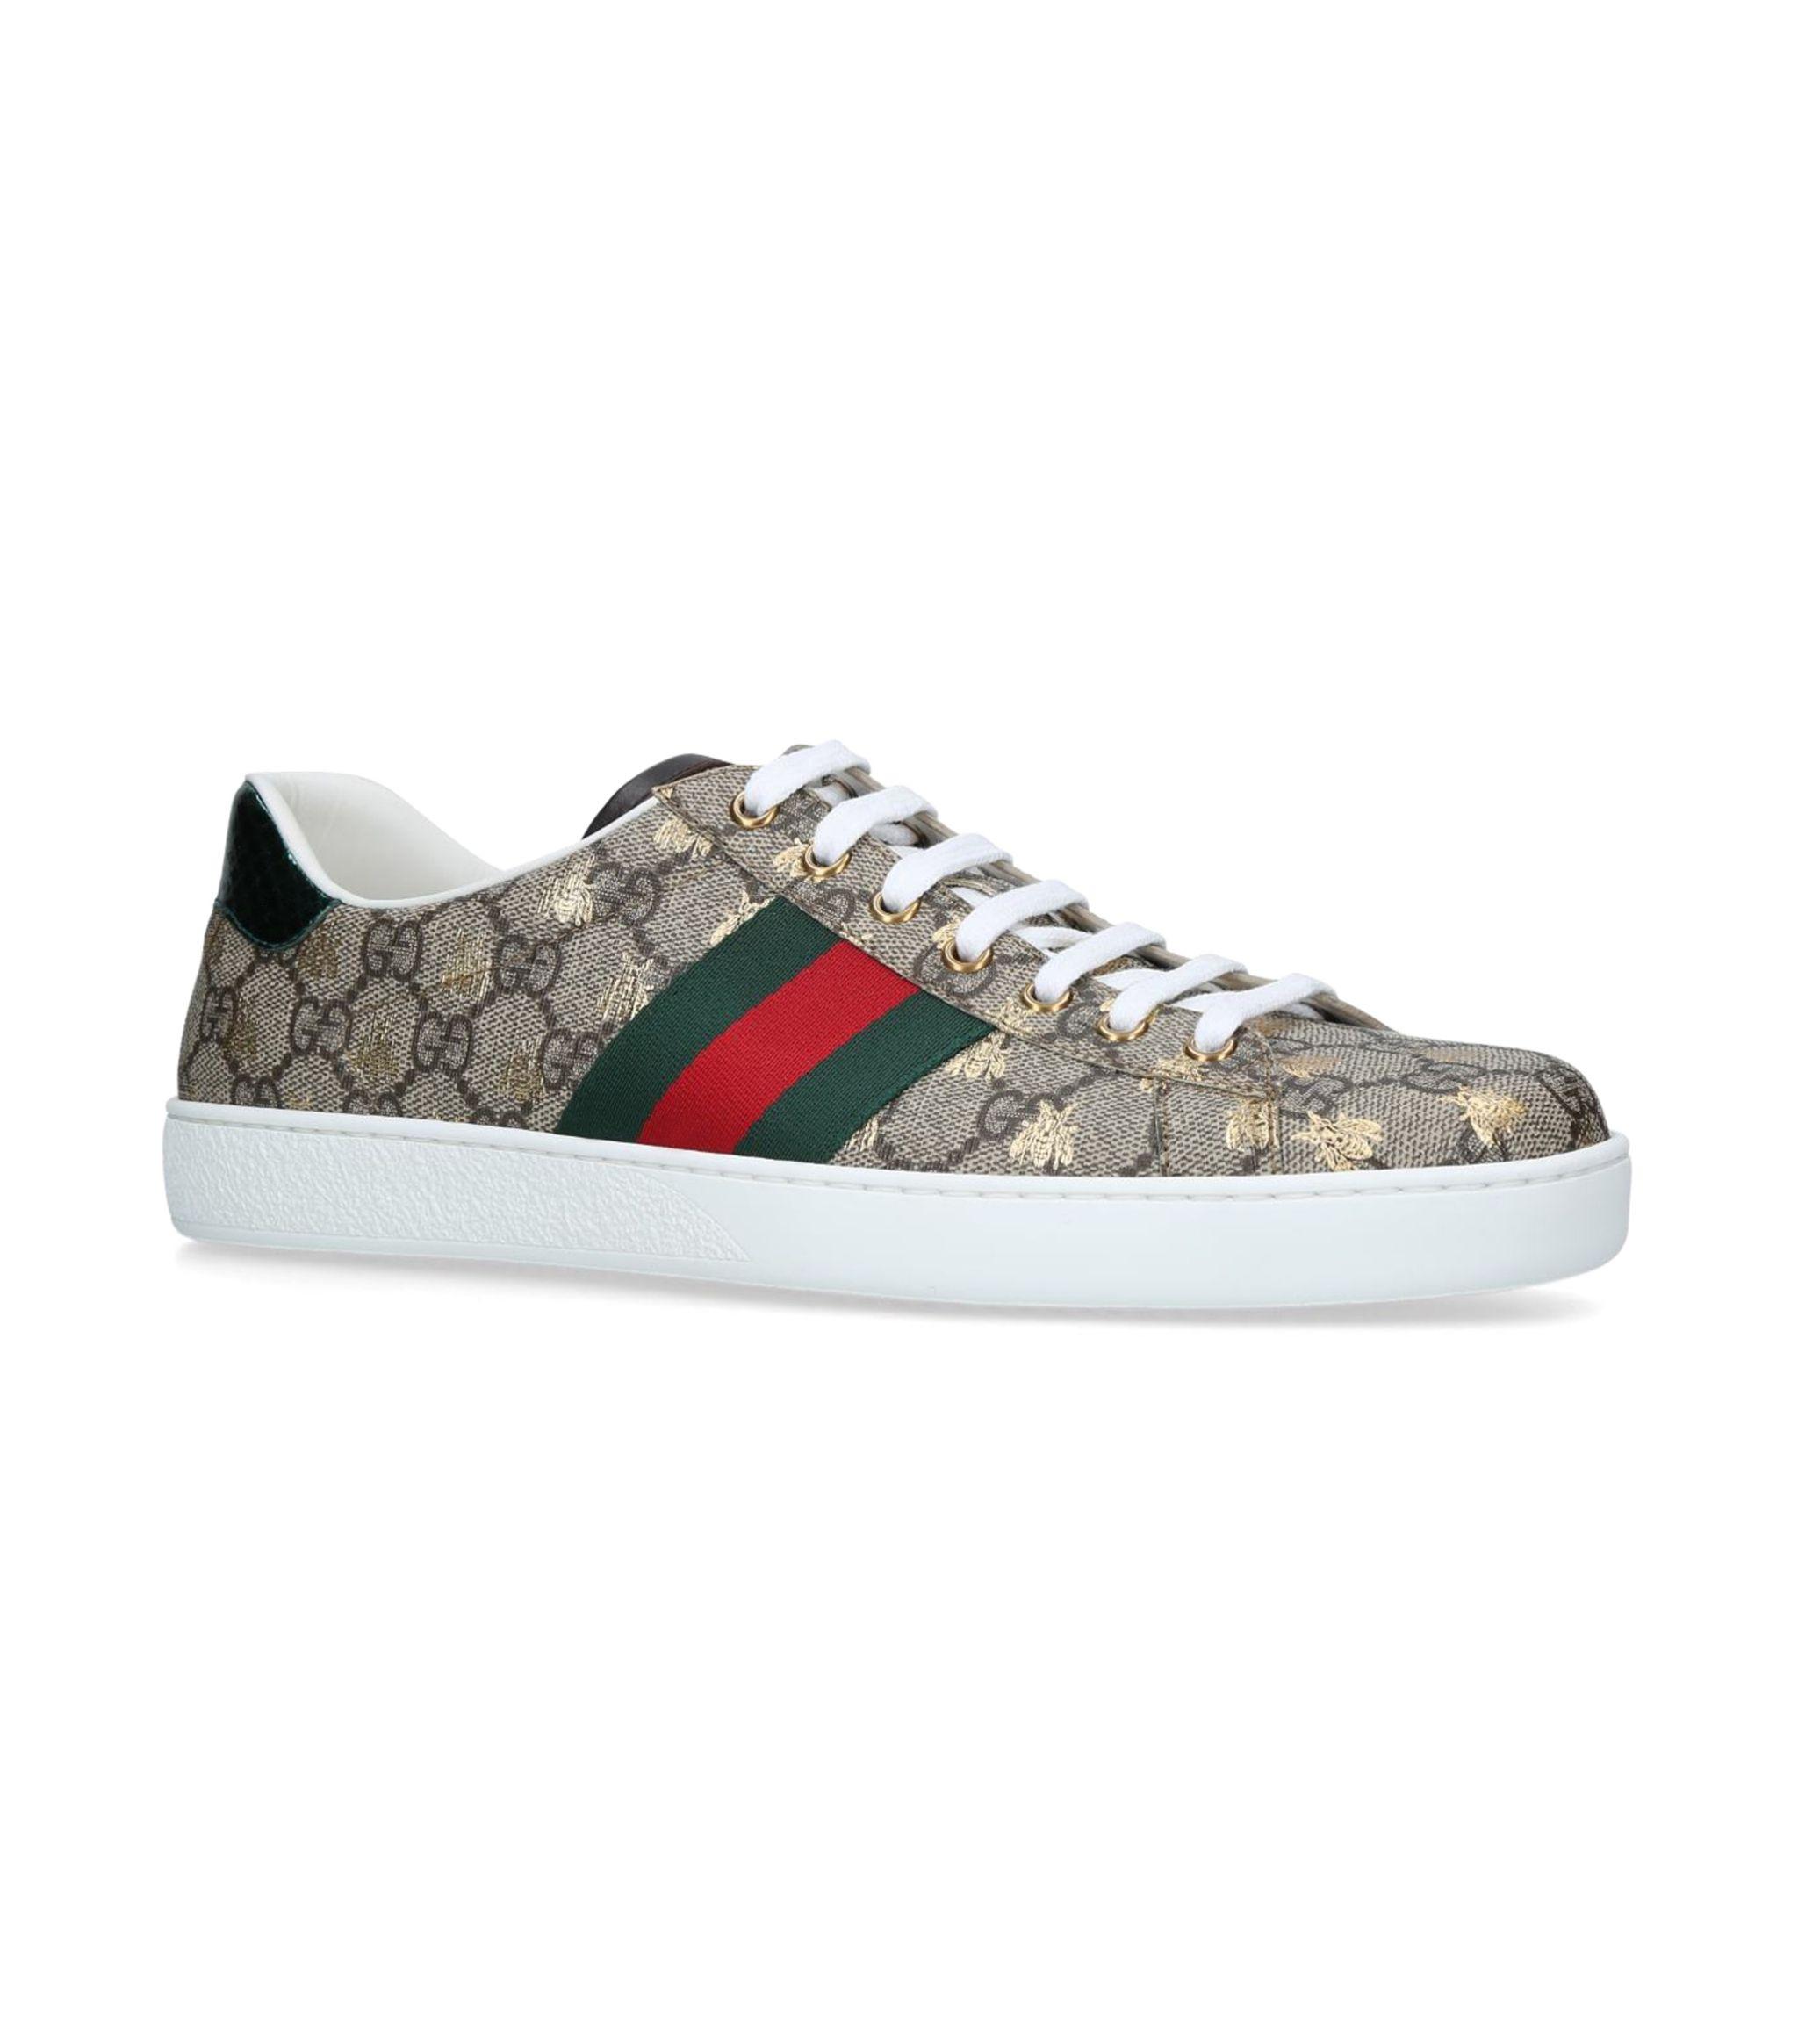 Gucci Canvas Golden Bumblebee Ace Sneakers for Men - Lyst